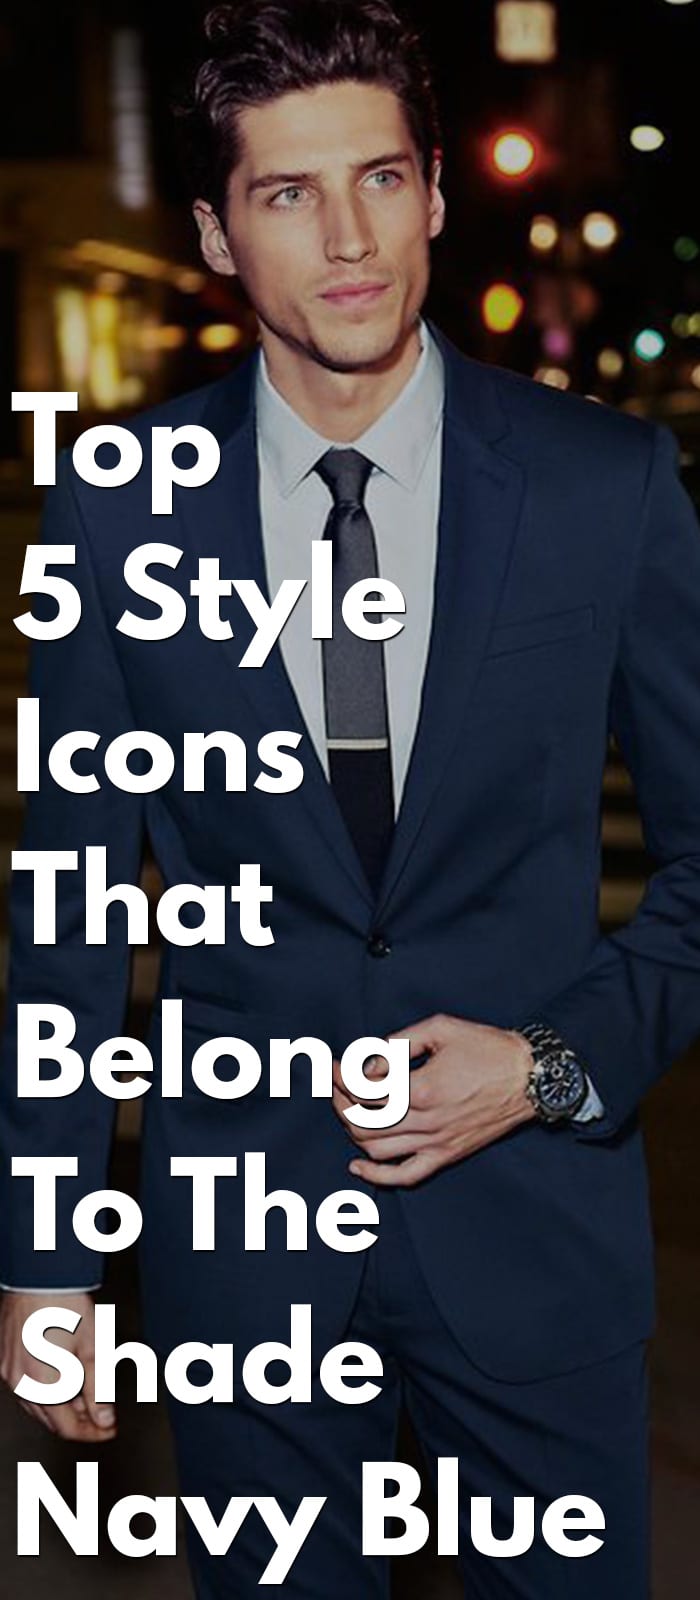 Top 5 Style Icons That Belong To The Shade Navy Blue